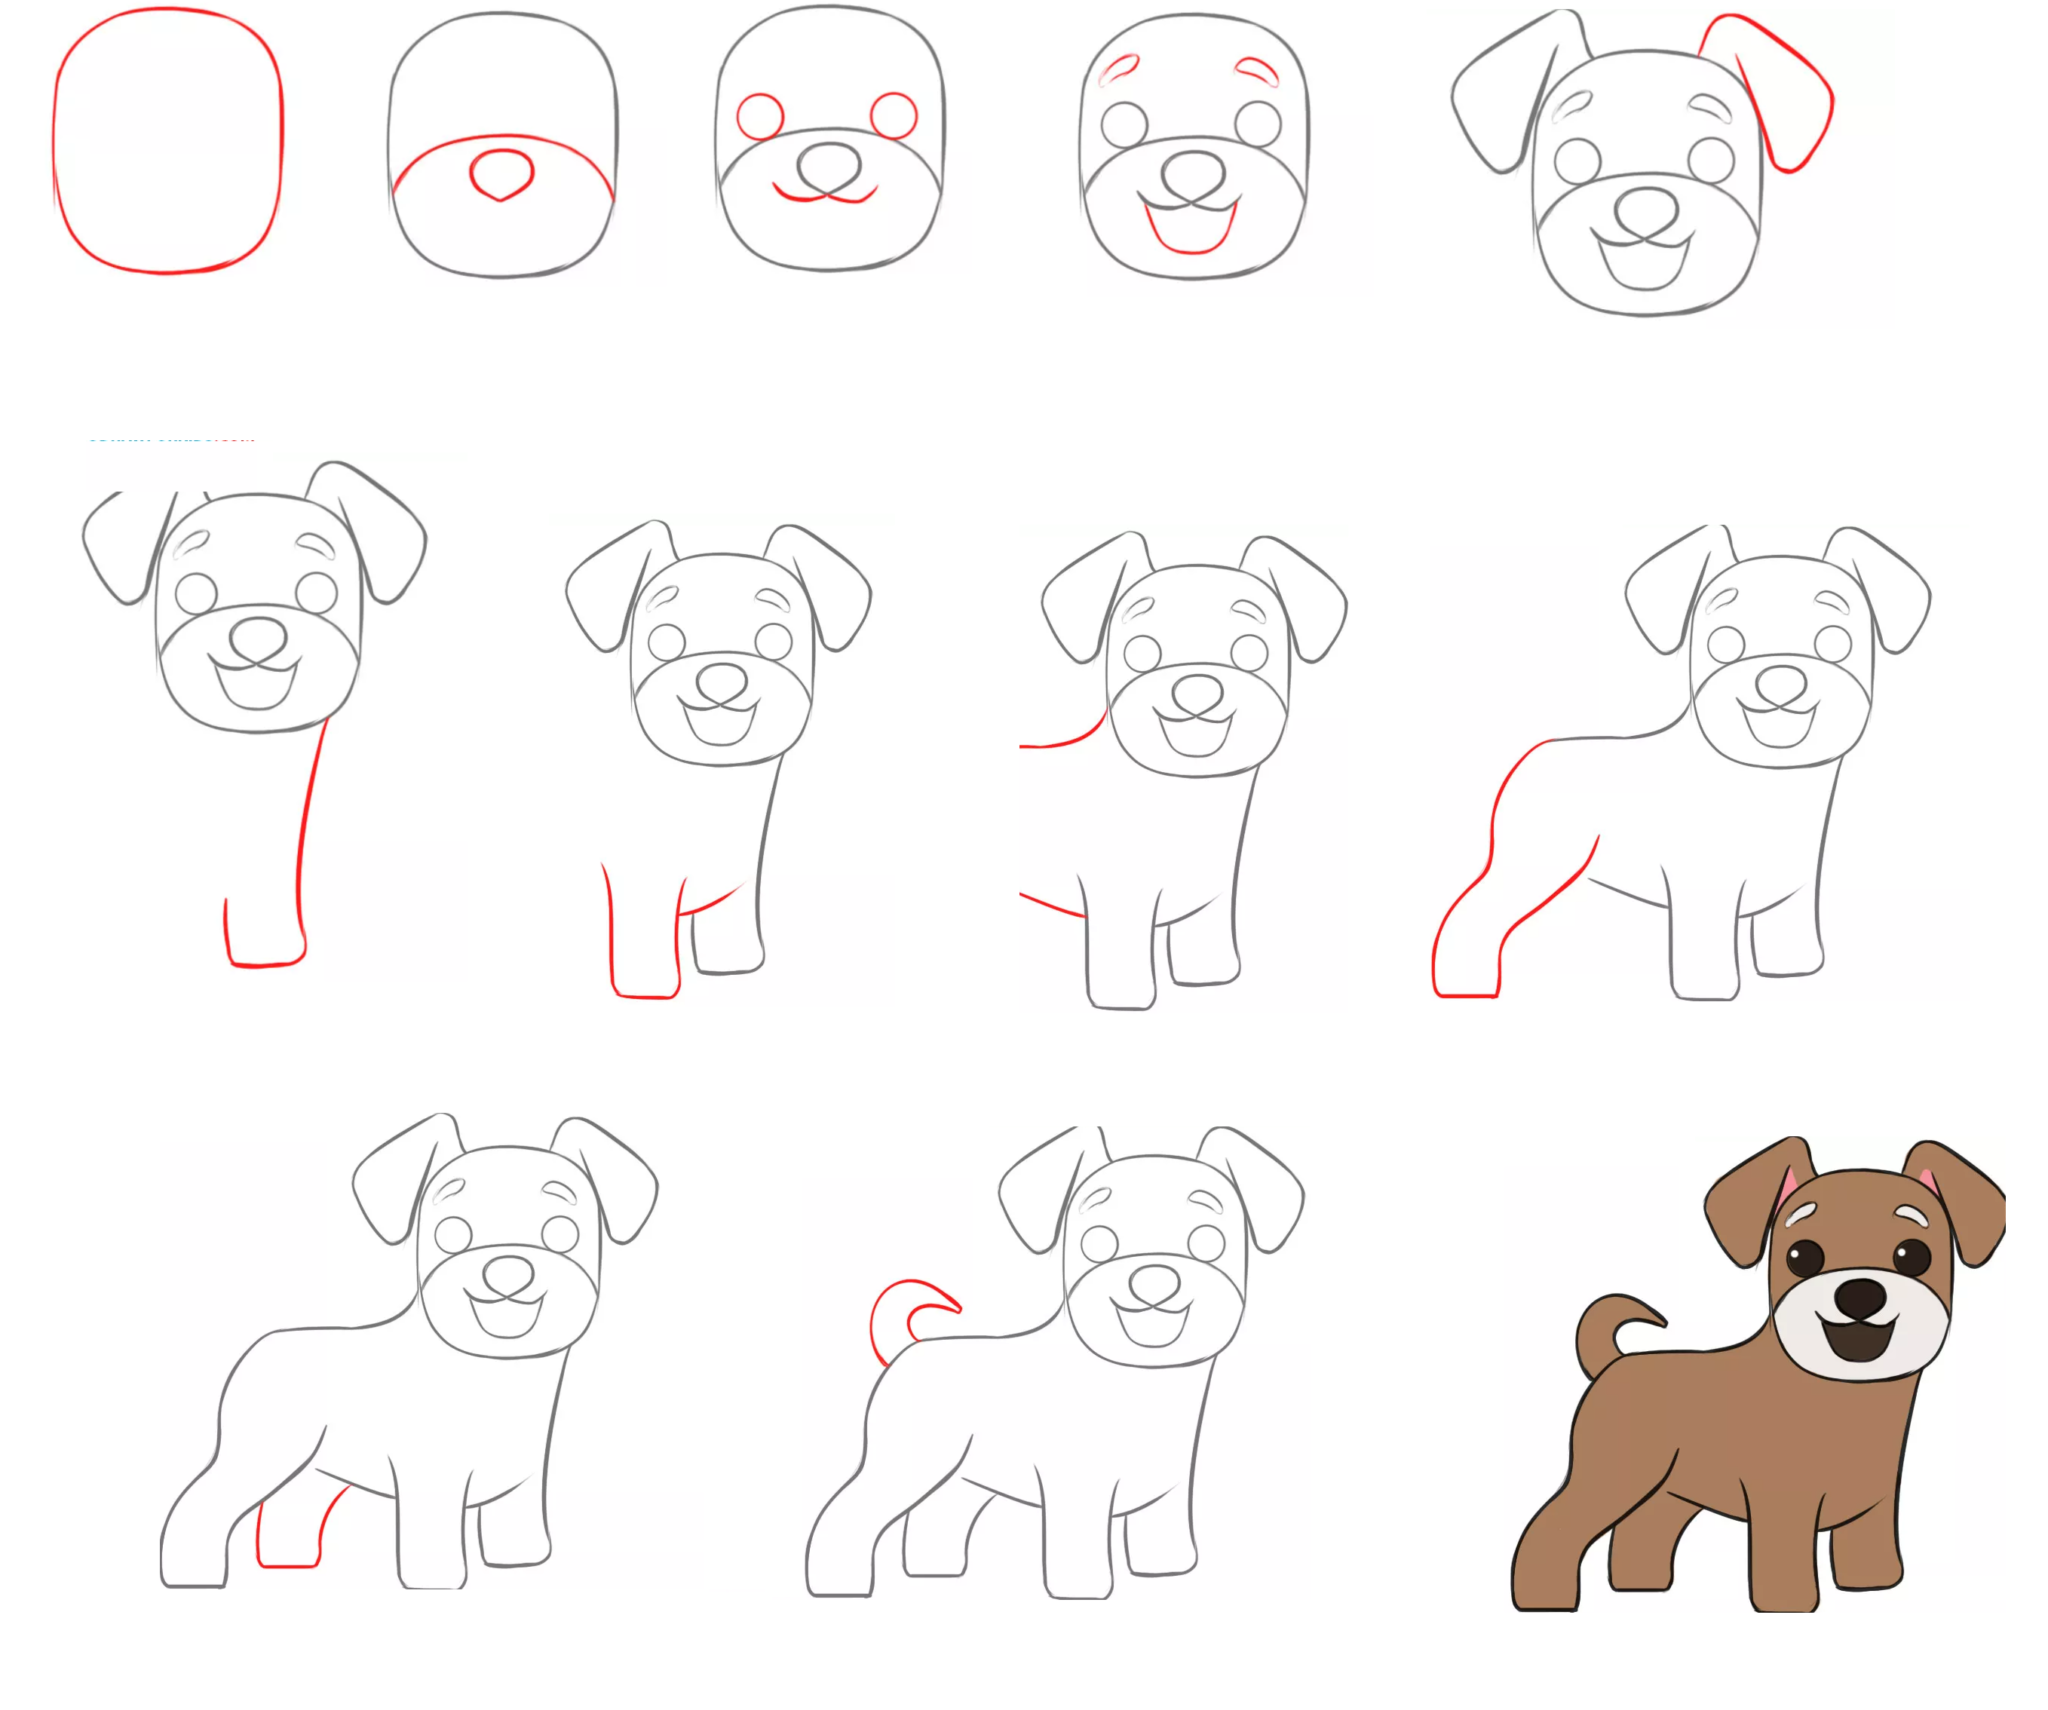 How To Draw A Dog: A Step-by-Step Guide For Children And Newbies